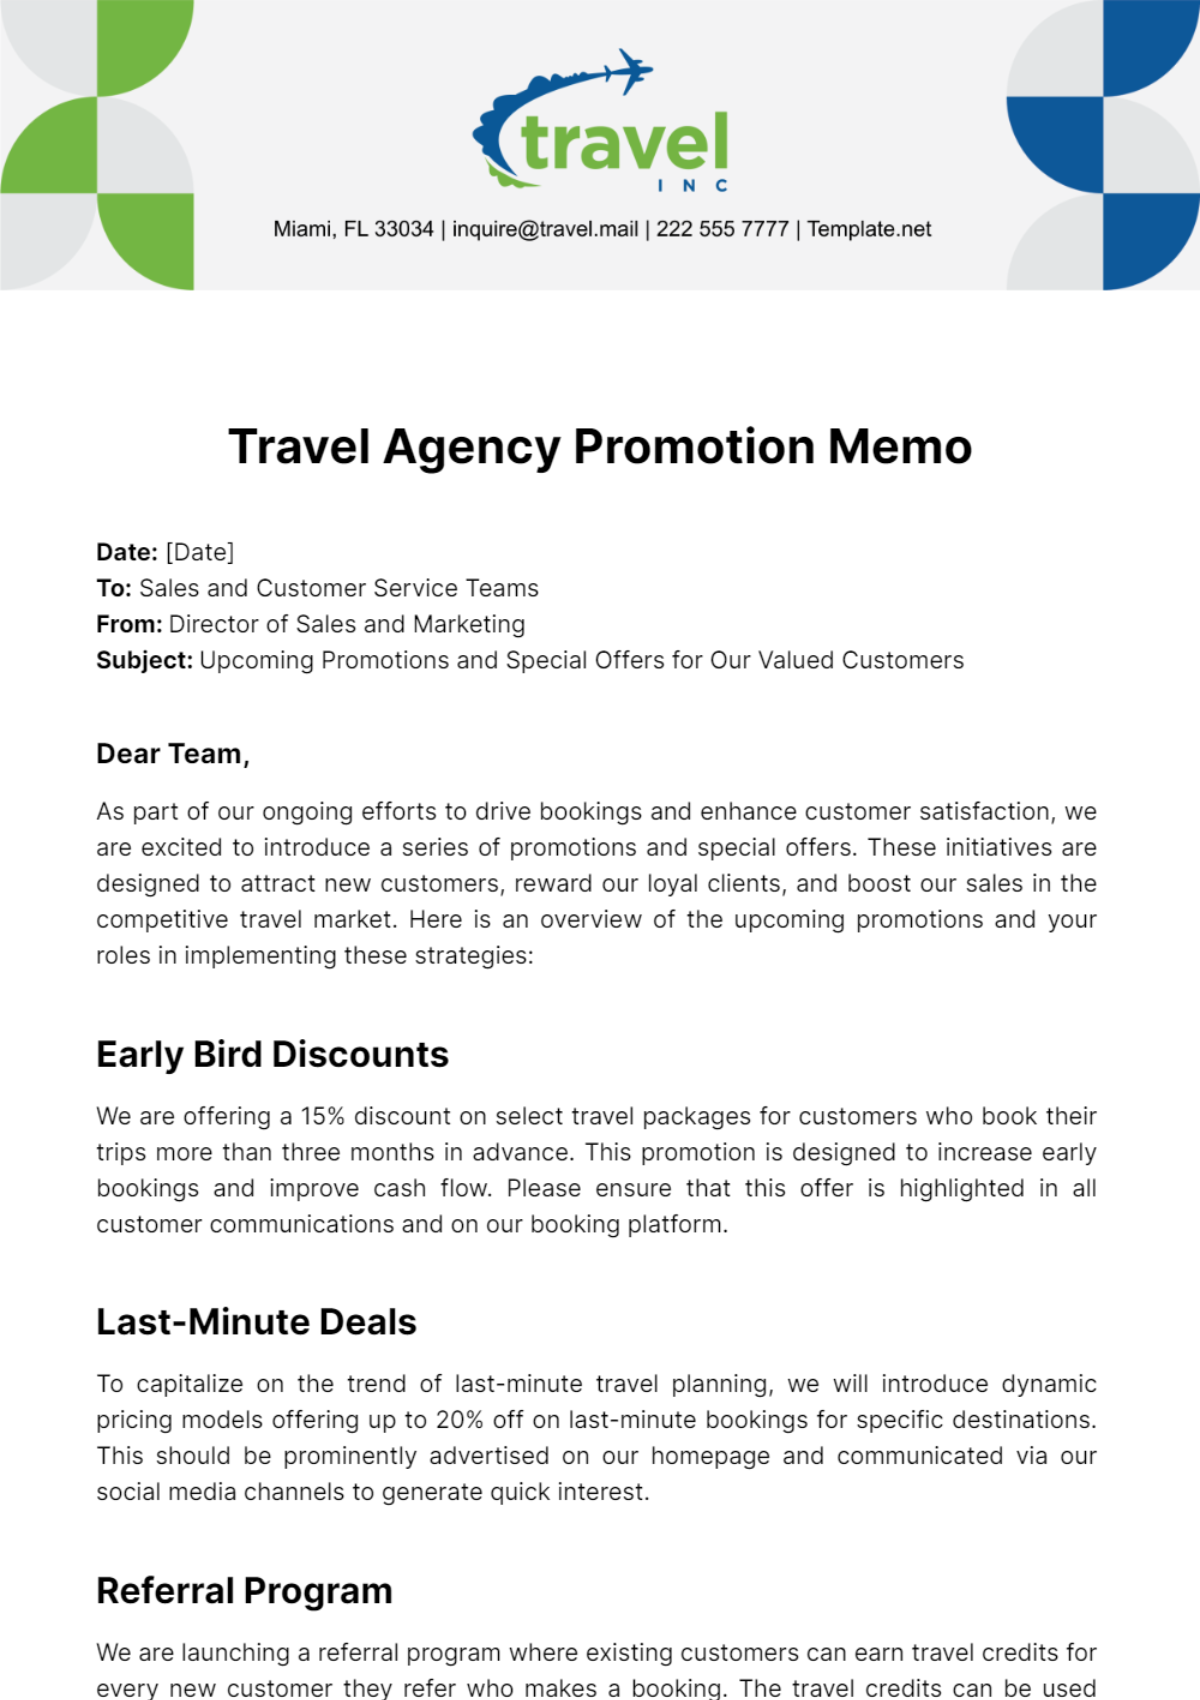 Free Travel Agency Promotion Memo Template